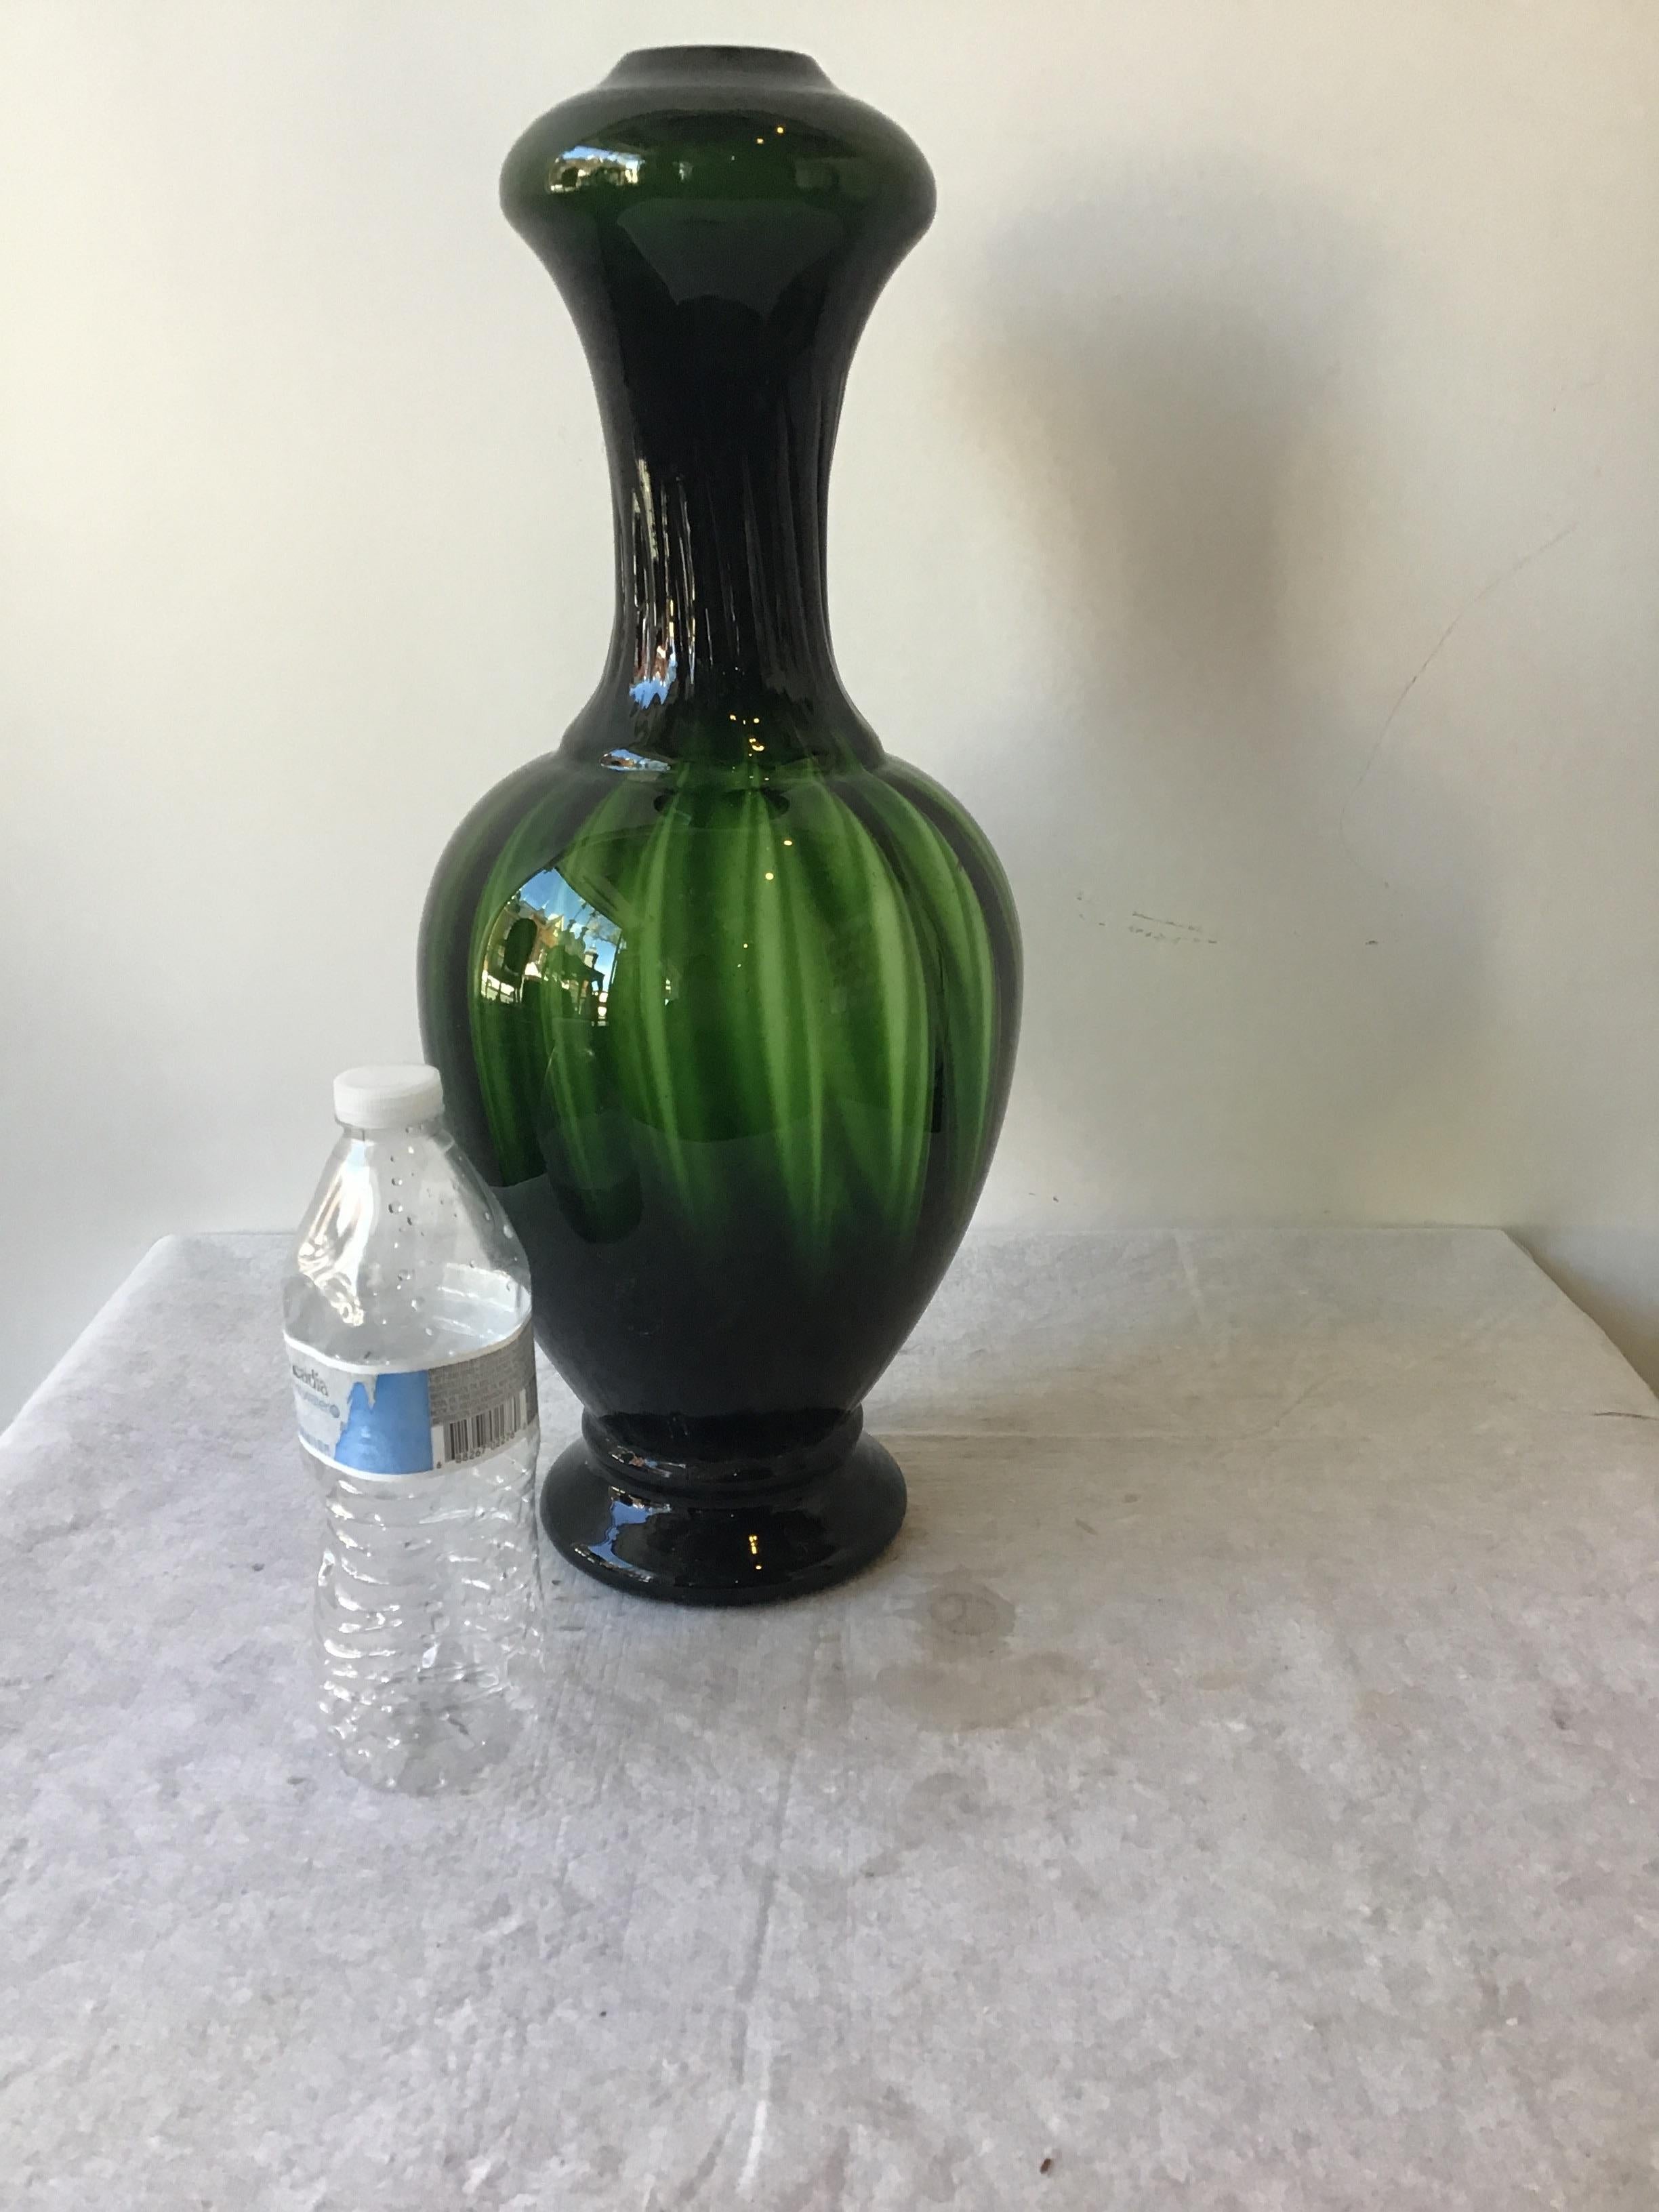 1960s green Murano lamp body by Balboa.
Lamp body needs all parts in order to be functioning light.